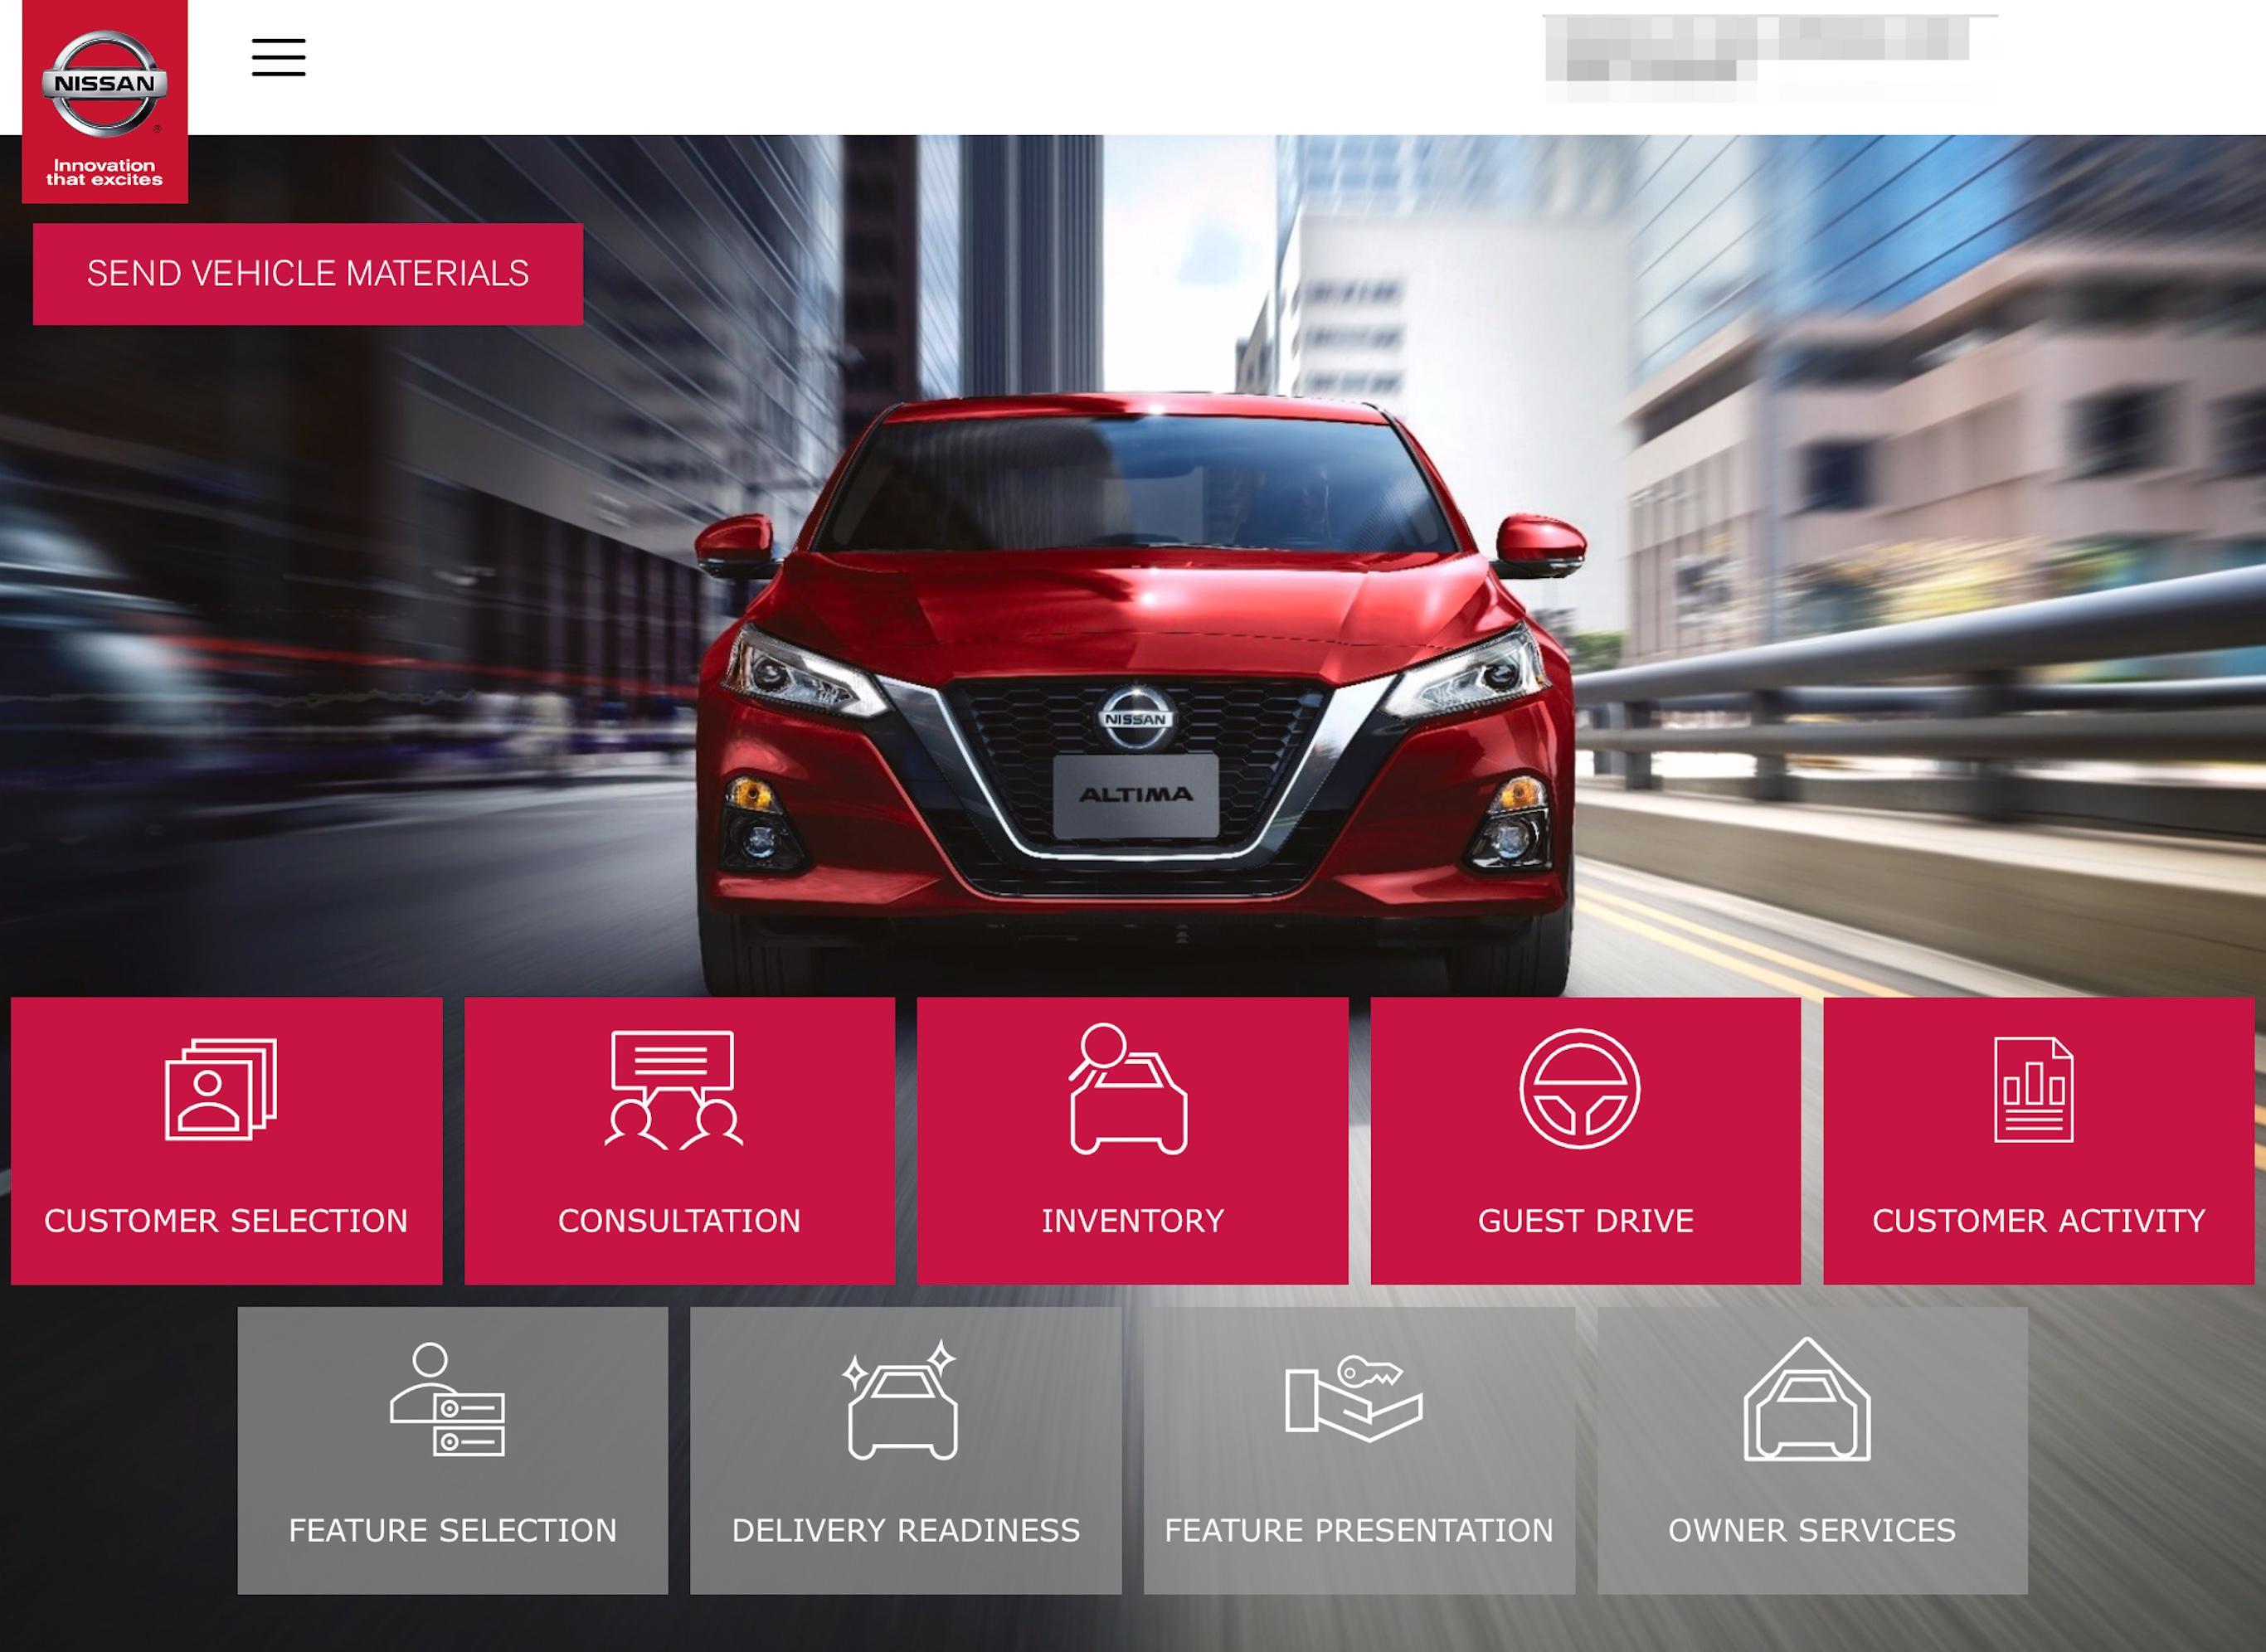 Nissan Ncar Android App Download